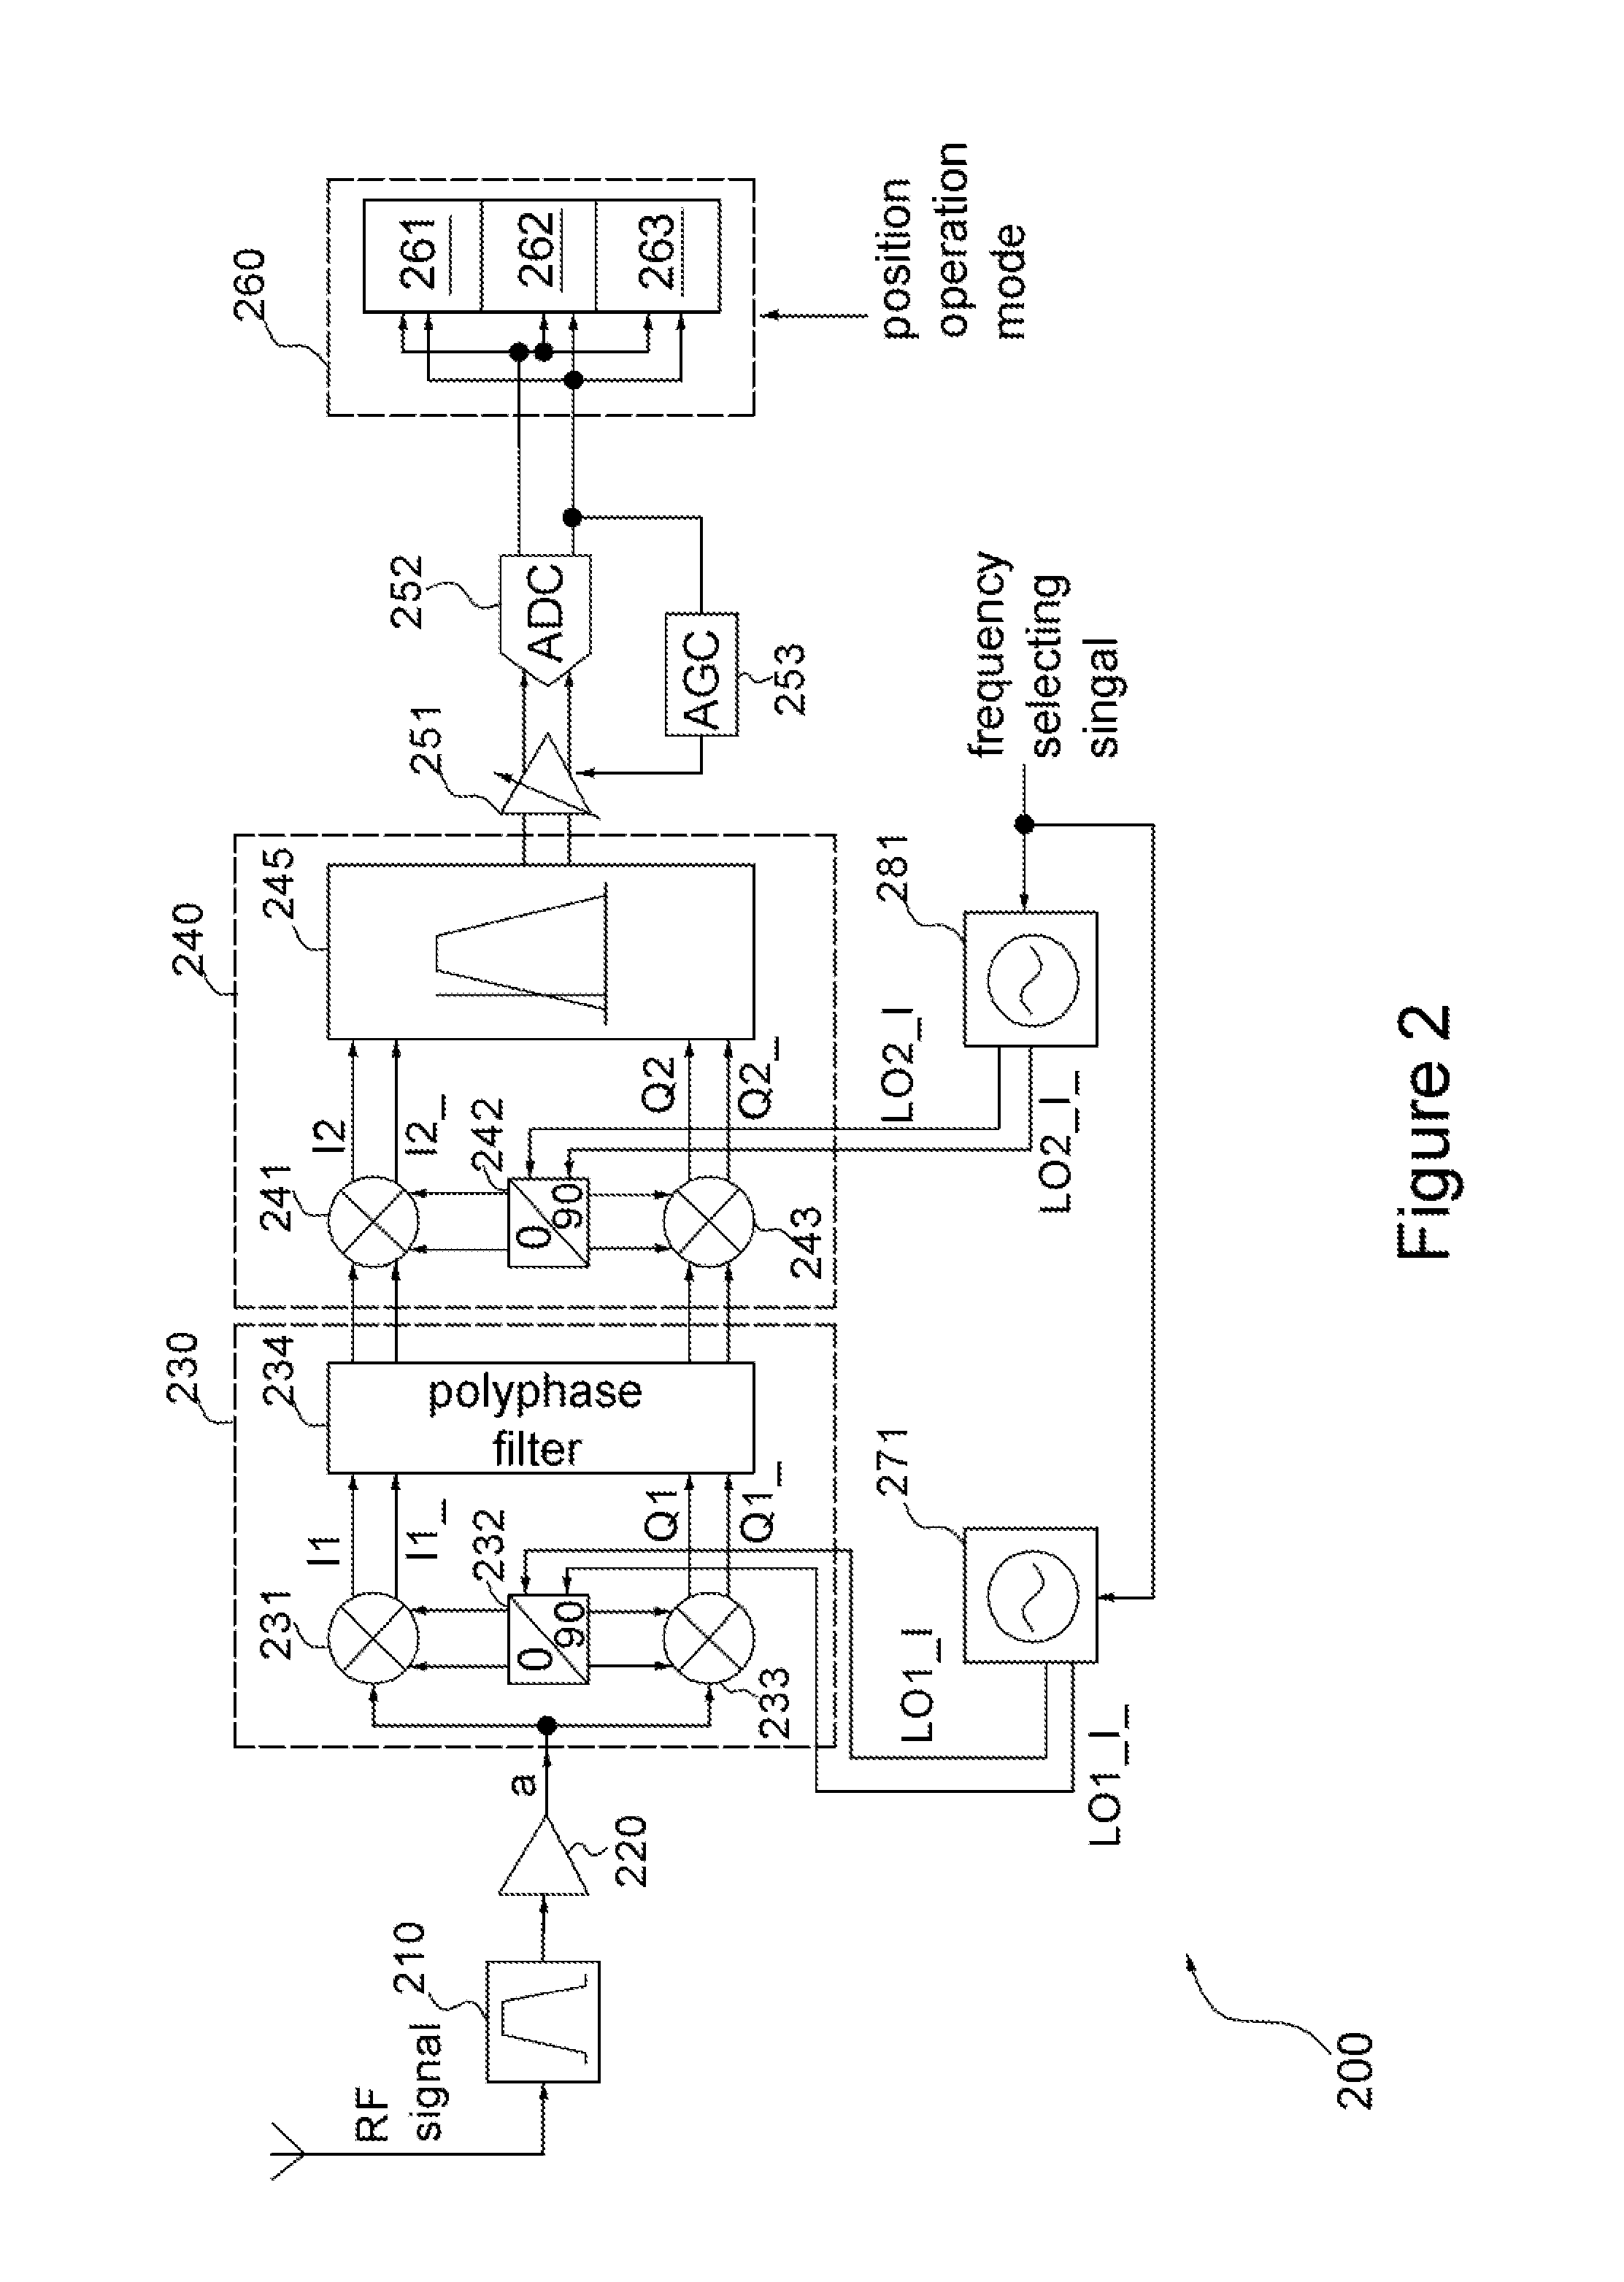 Signal Processing Apparatus for Multi-mode Satellite Positioning System and Method Thereof